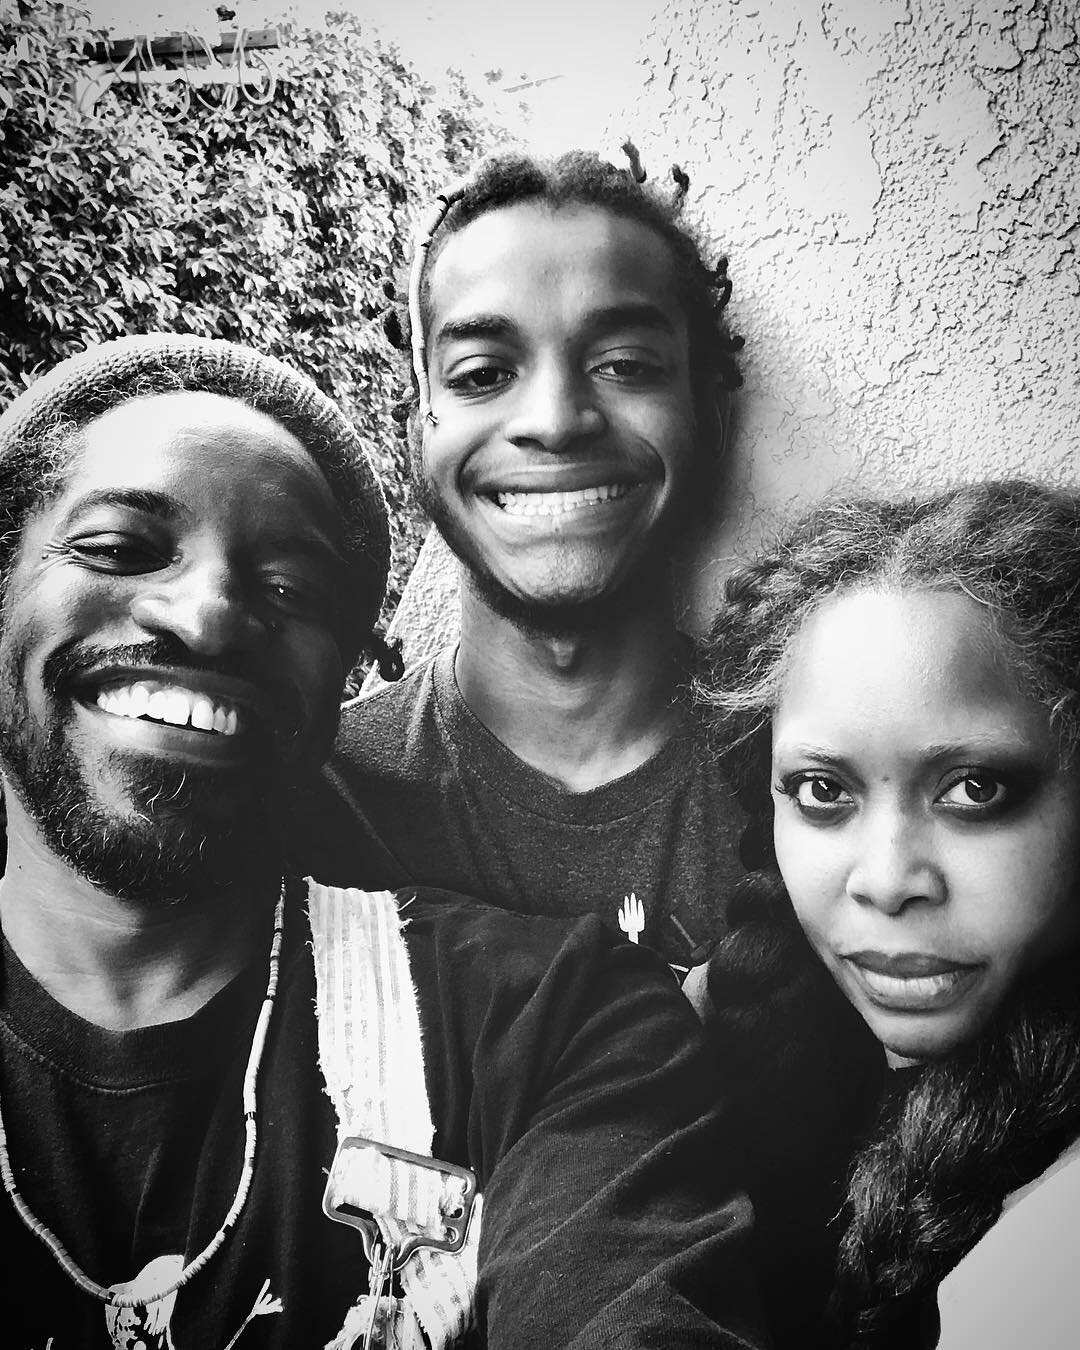 Seven Sirius Benjamin's bio Who is the son of Andre 3000 and Erykah